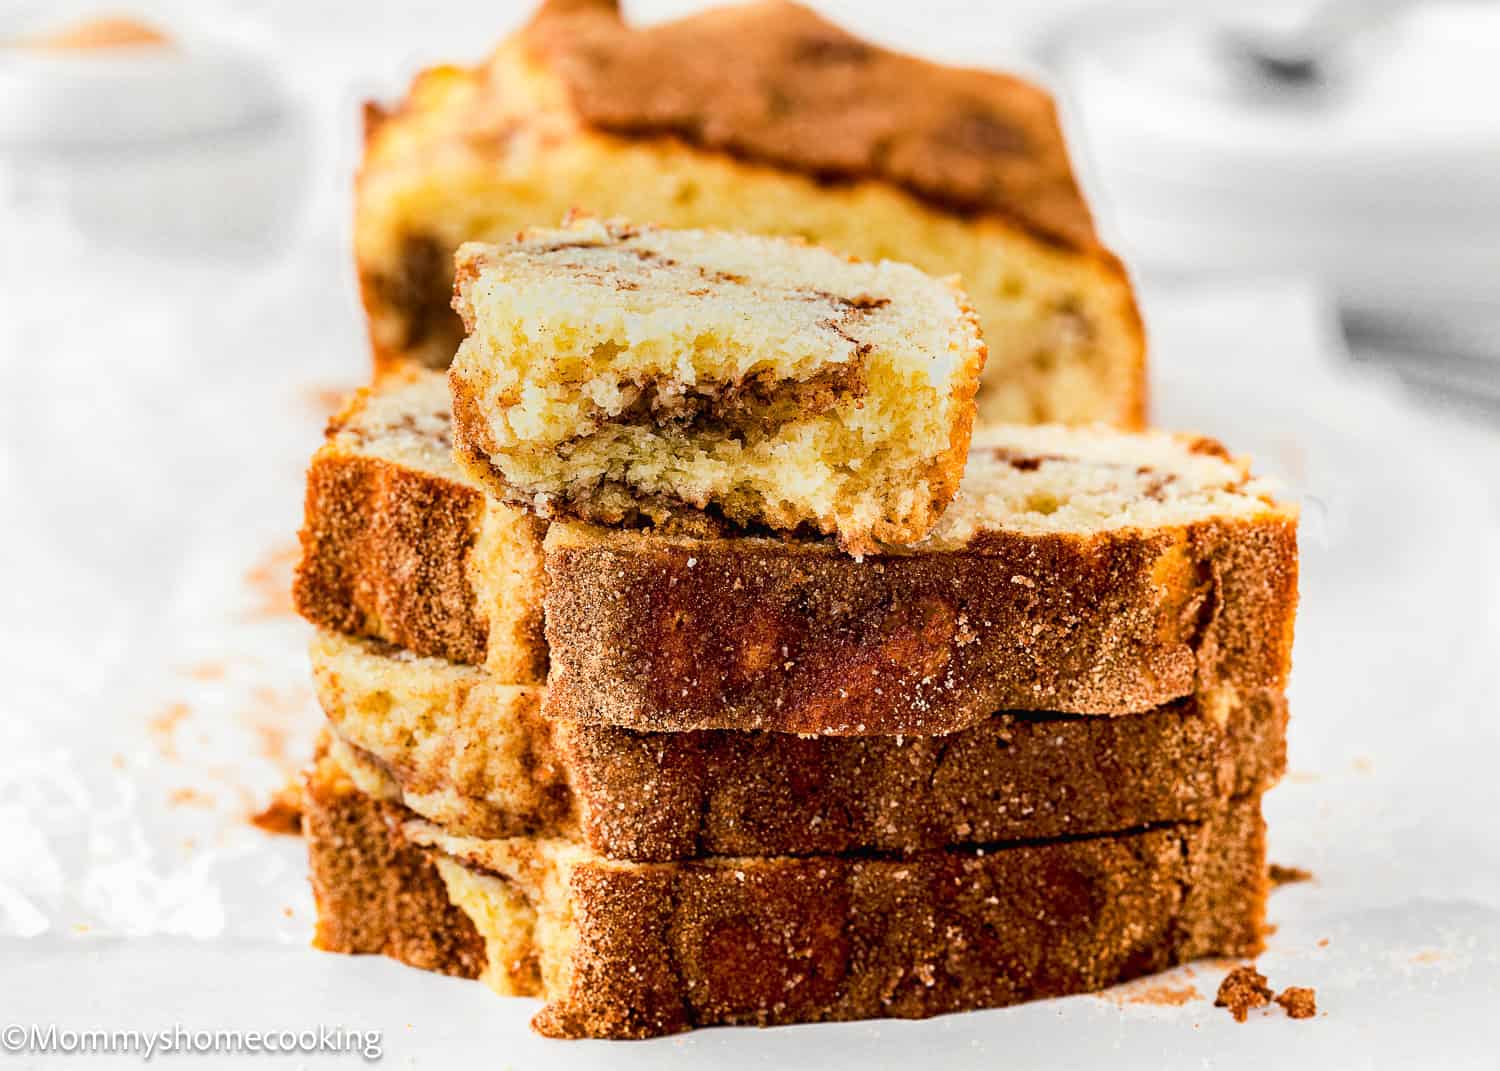 stack of 4 sliced of Cinnamon Swirl Quick Bread made with no eggs and no dairy, sliced showing its perfect inside texture over a white surface.